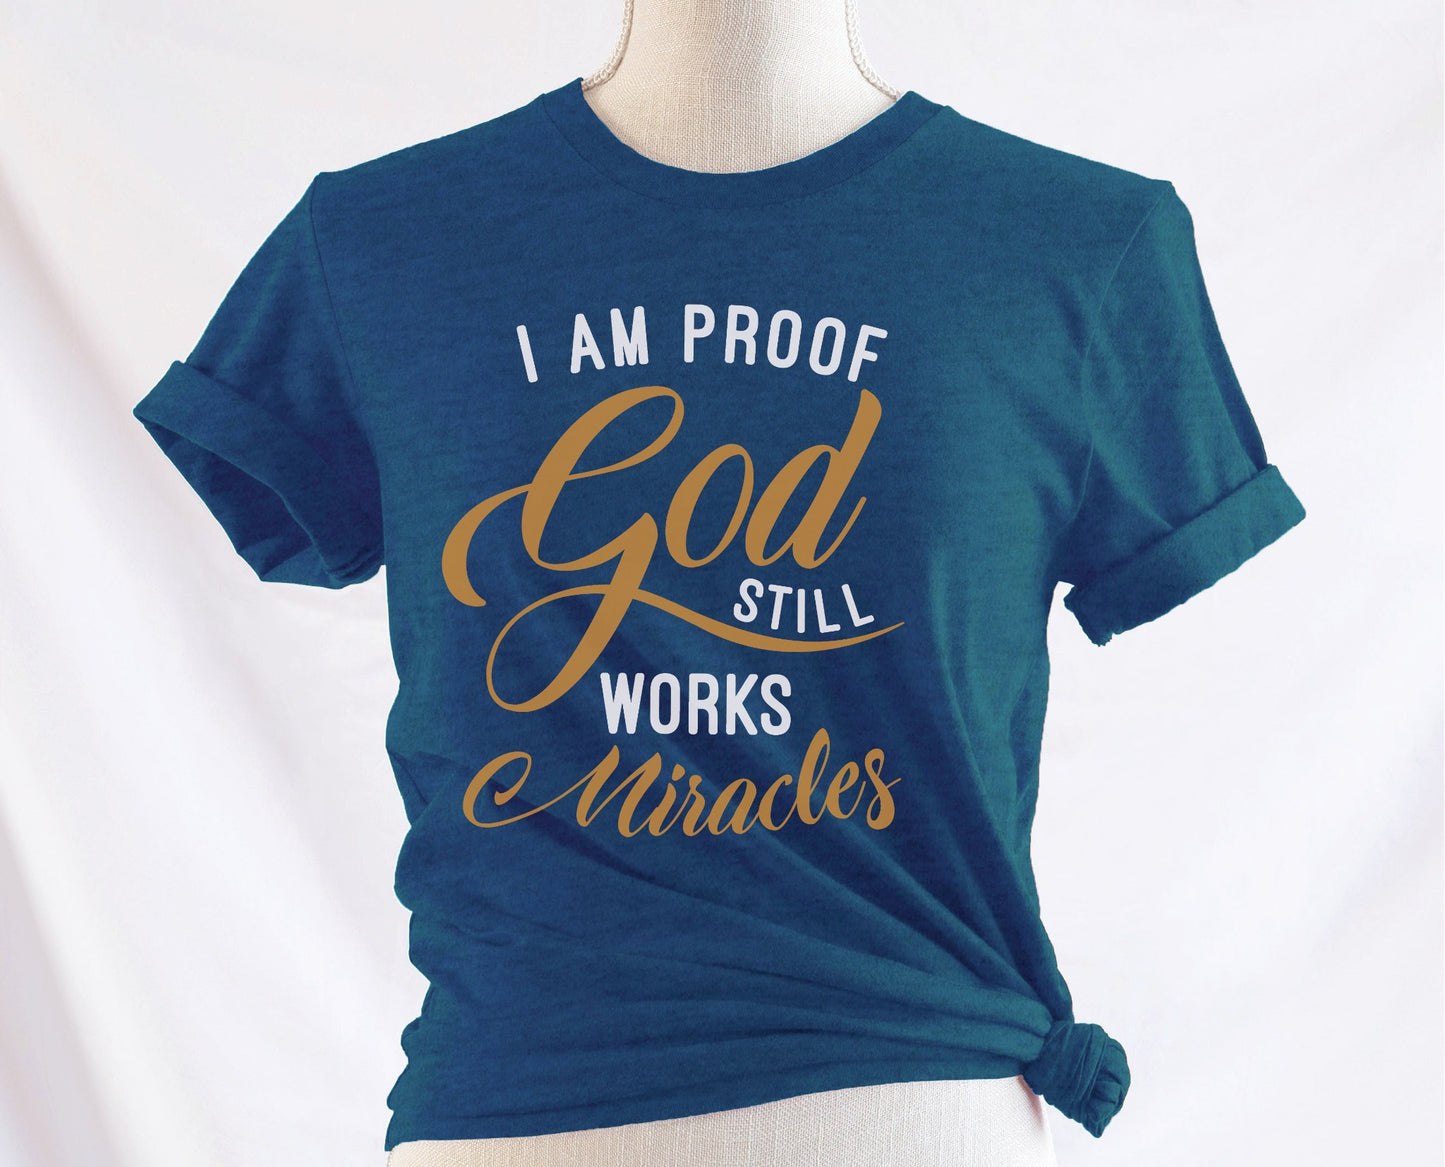 I am proof God still works miracles Christian aesthetic testimony design printed in white and gold on soft heather deep teal unisex t-shirt for women